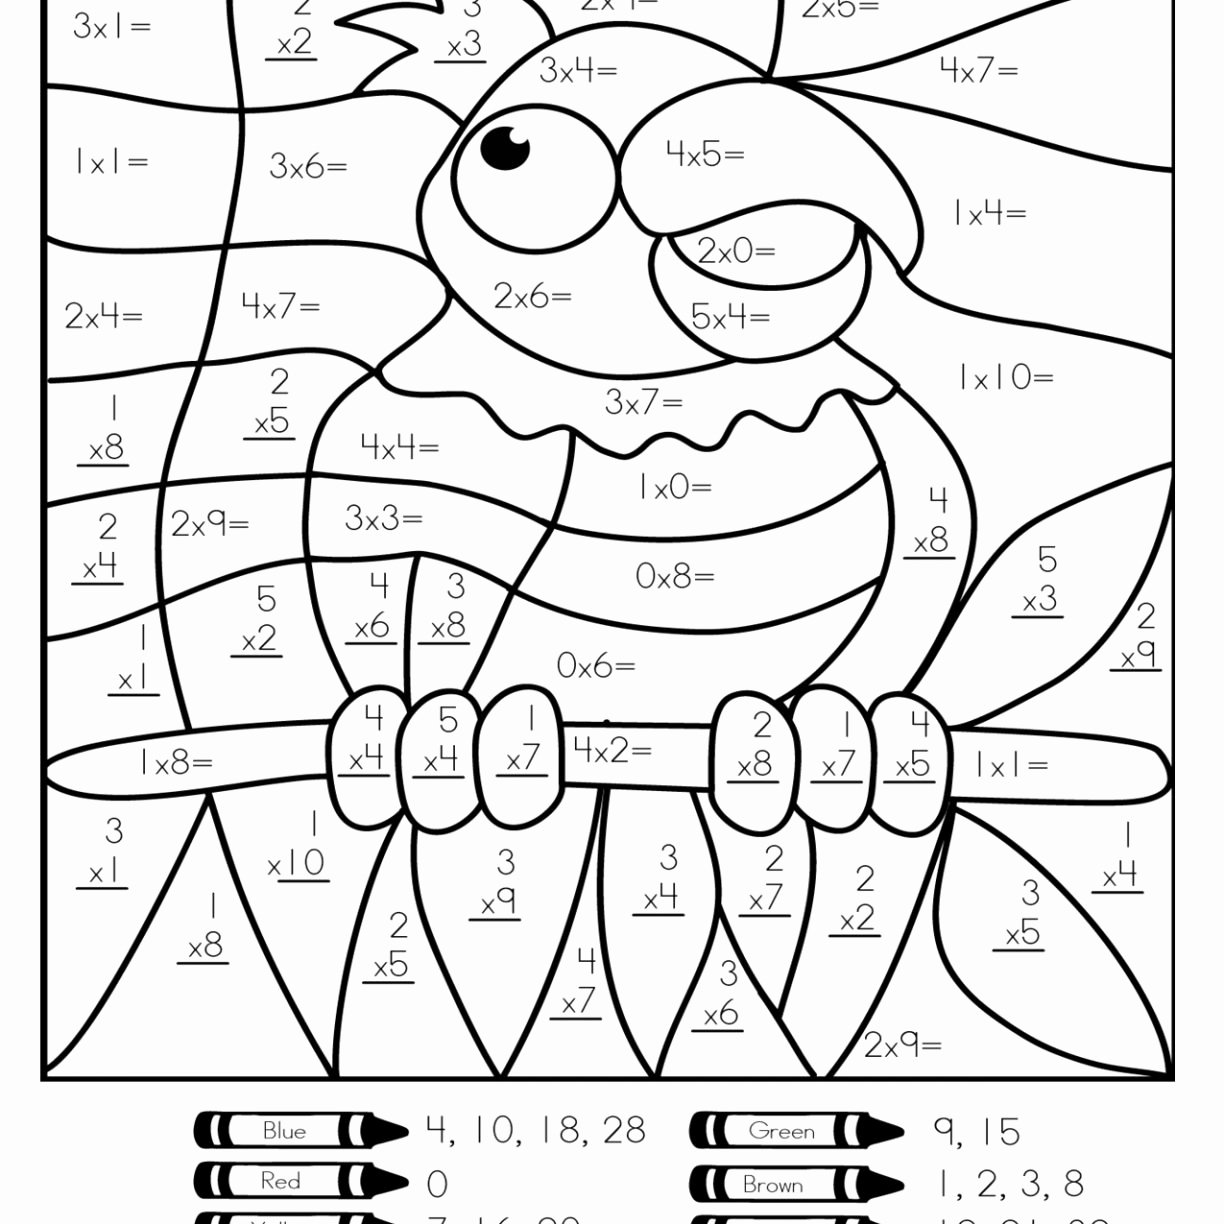 Coloring Math Worksheets 2nd Grade Best Of Math Coloring Pages 2nd Grade at Getcolorings